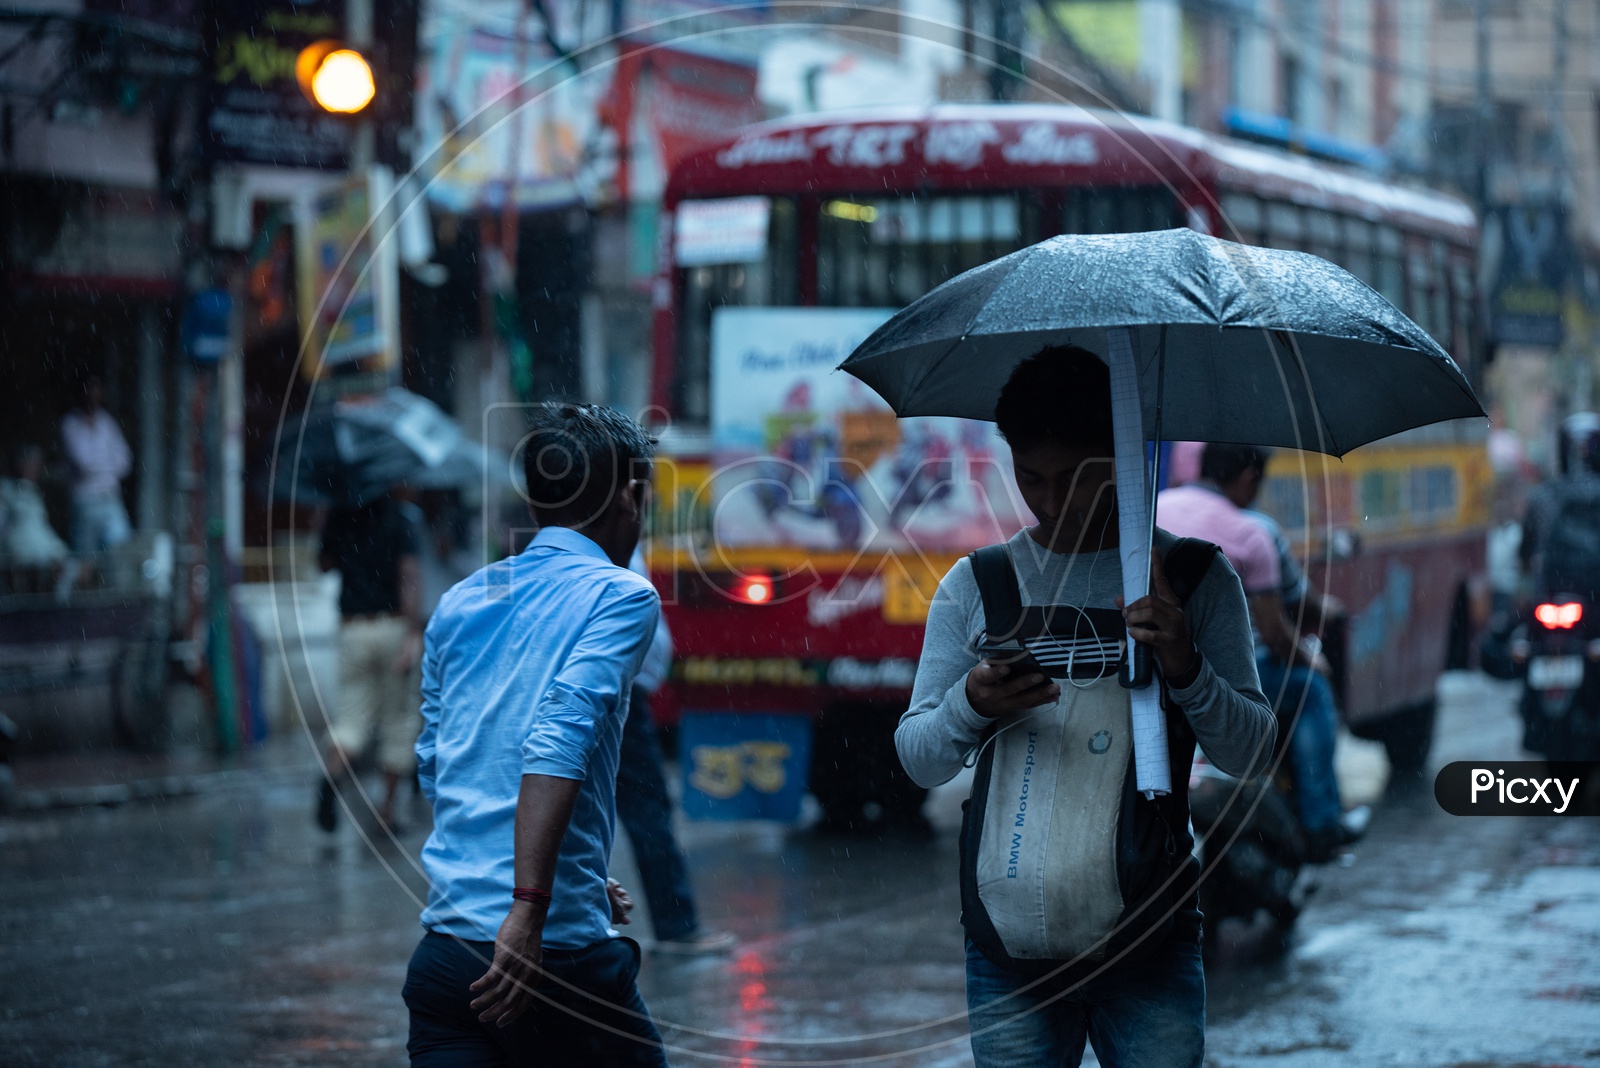 Pedestrians  Holding  umbrellas And Taking Cover from Heavy  Rain  Duer To Cyclone  Fani  on  Howrah  Roads